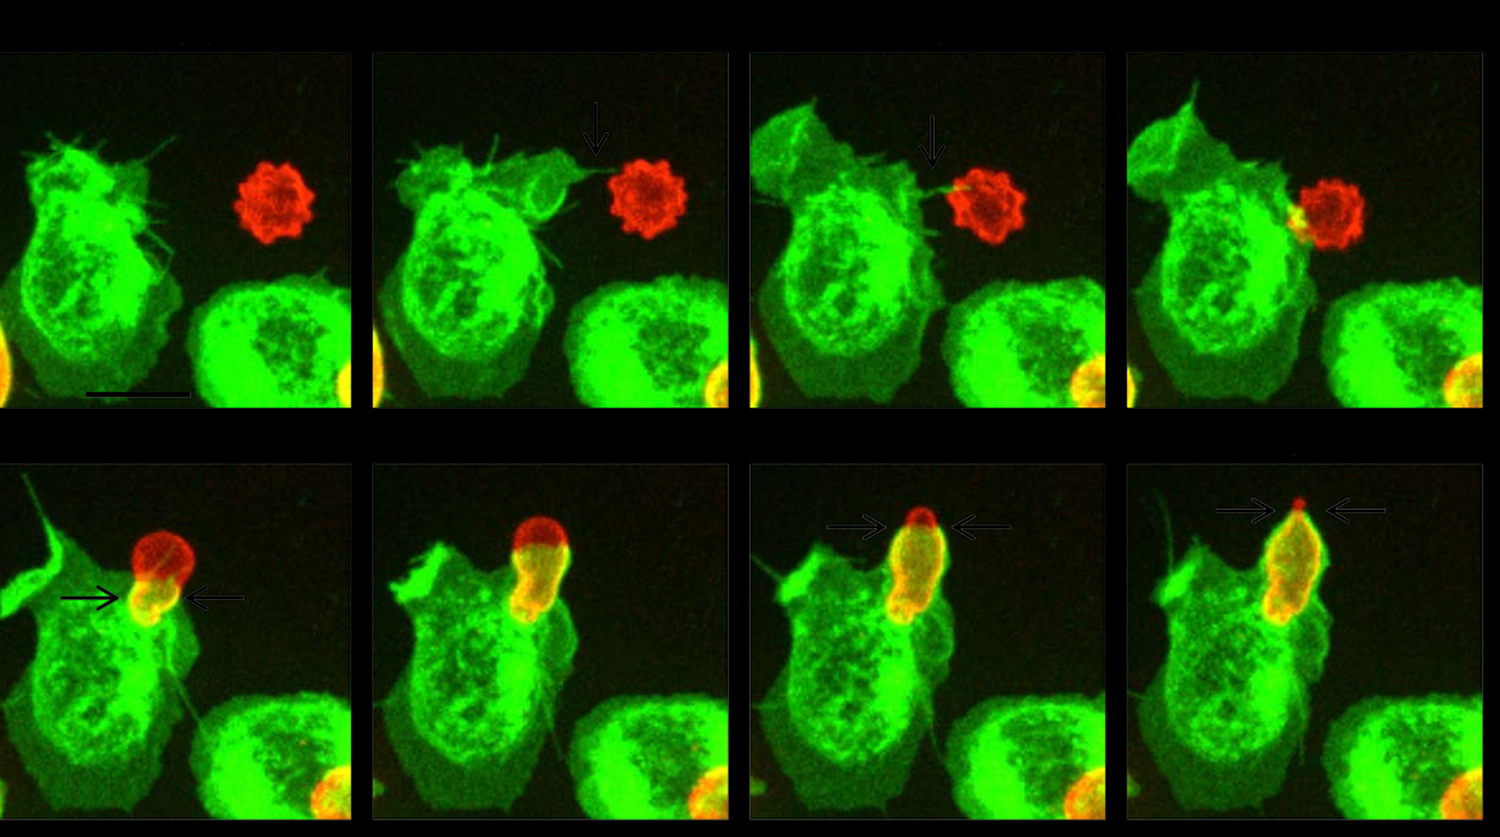 <p>The time-lapse images below show a mouse white blood cell capturing and engulfing a human red blood cell. This beautifully depicted immune response event provides an excellent example of  __________________. a. receptor mediated endocytosis b. phagocytosis c. pinocytosis</p>